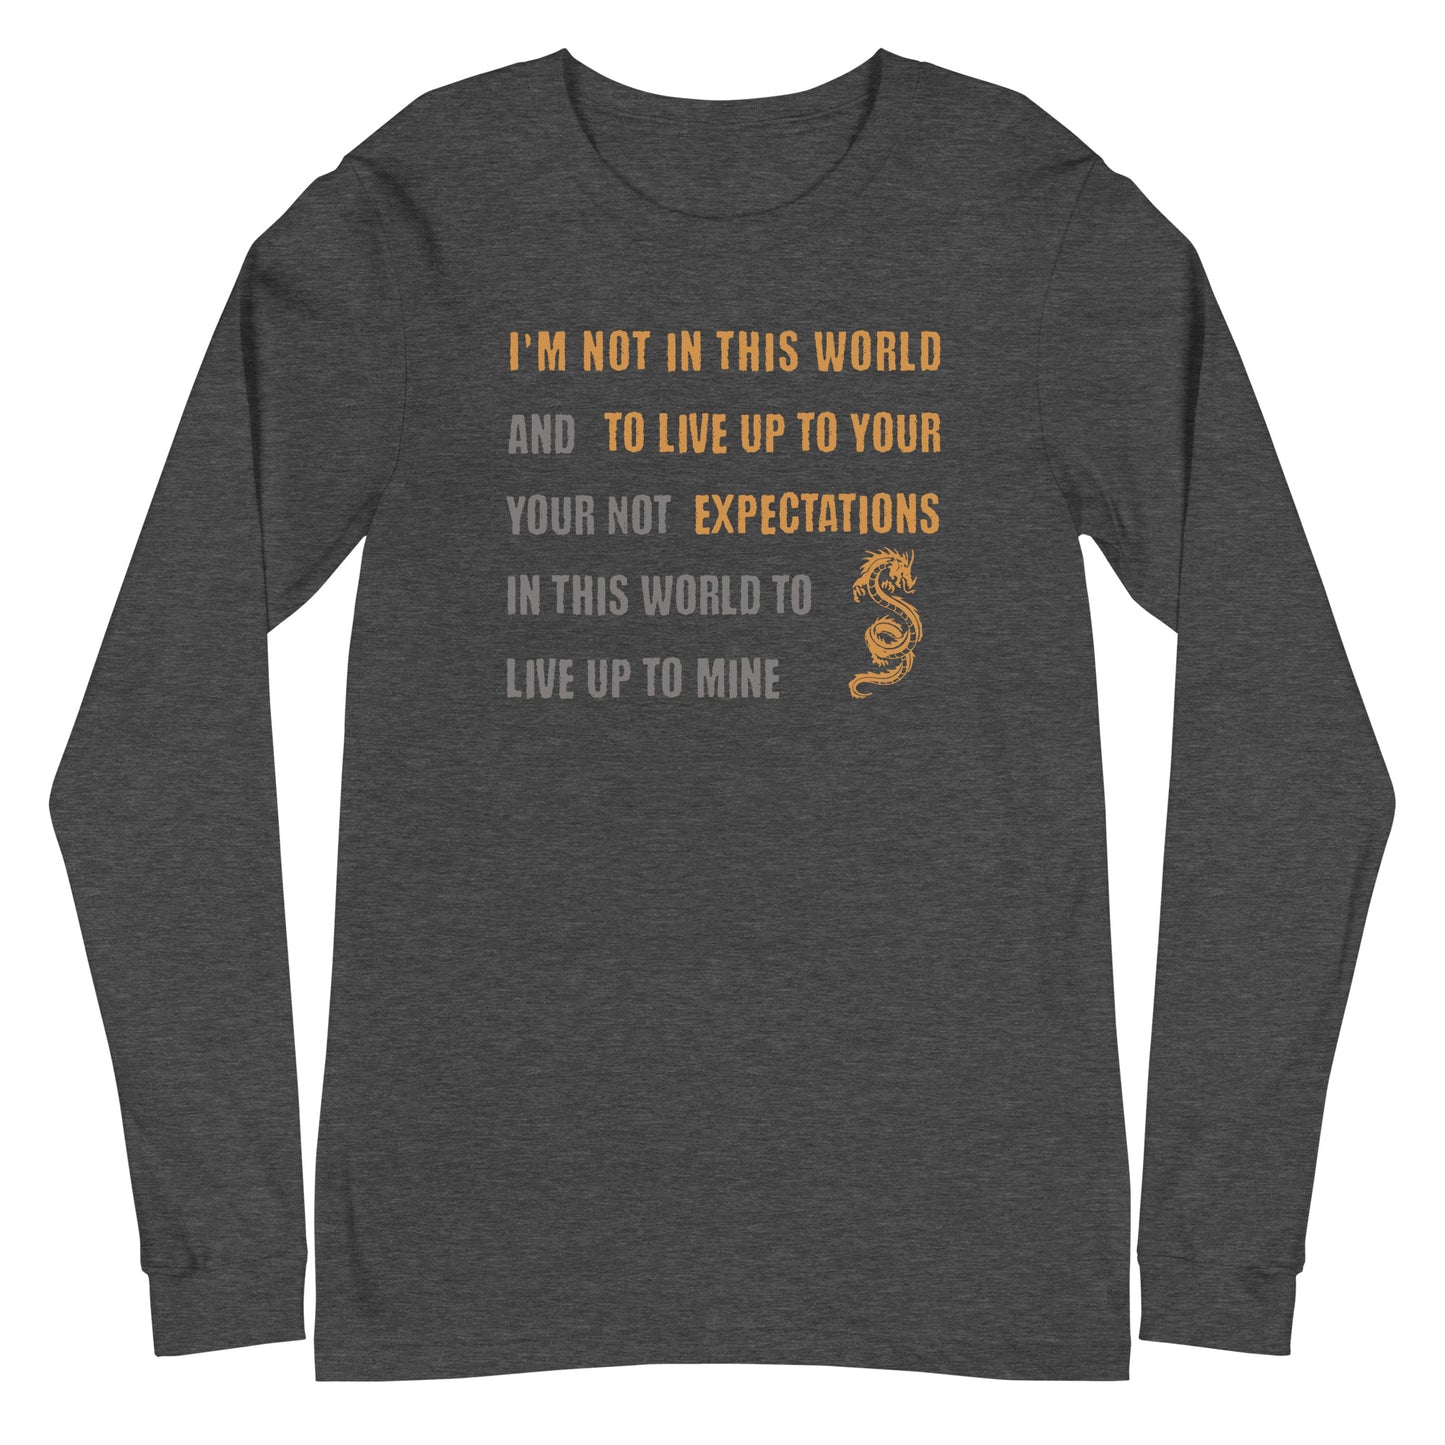 I'm Not Here To Live Up To Your Expectations Long Sleeve Tee Dark Grey Heather